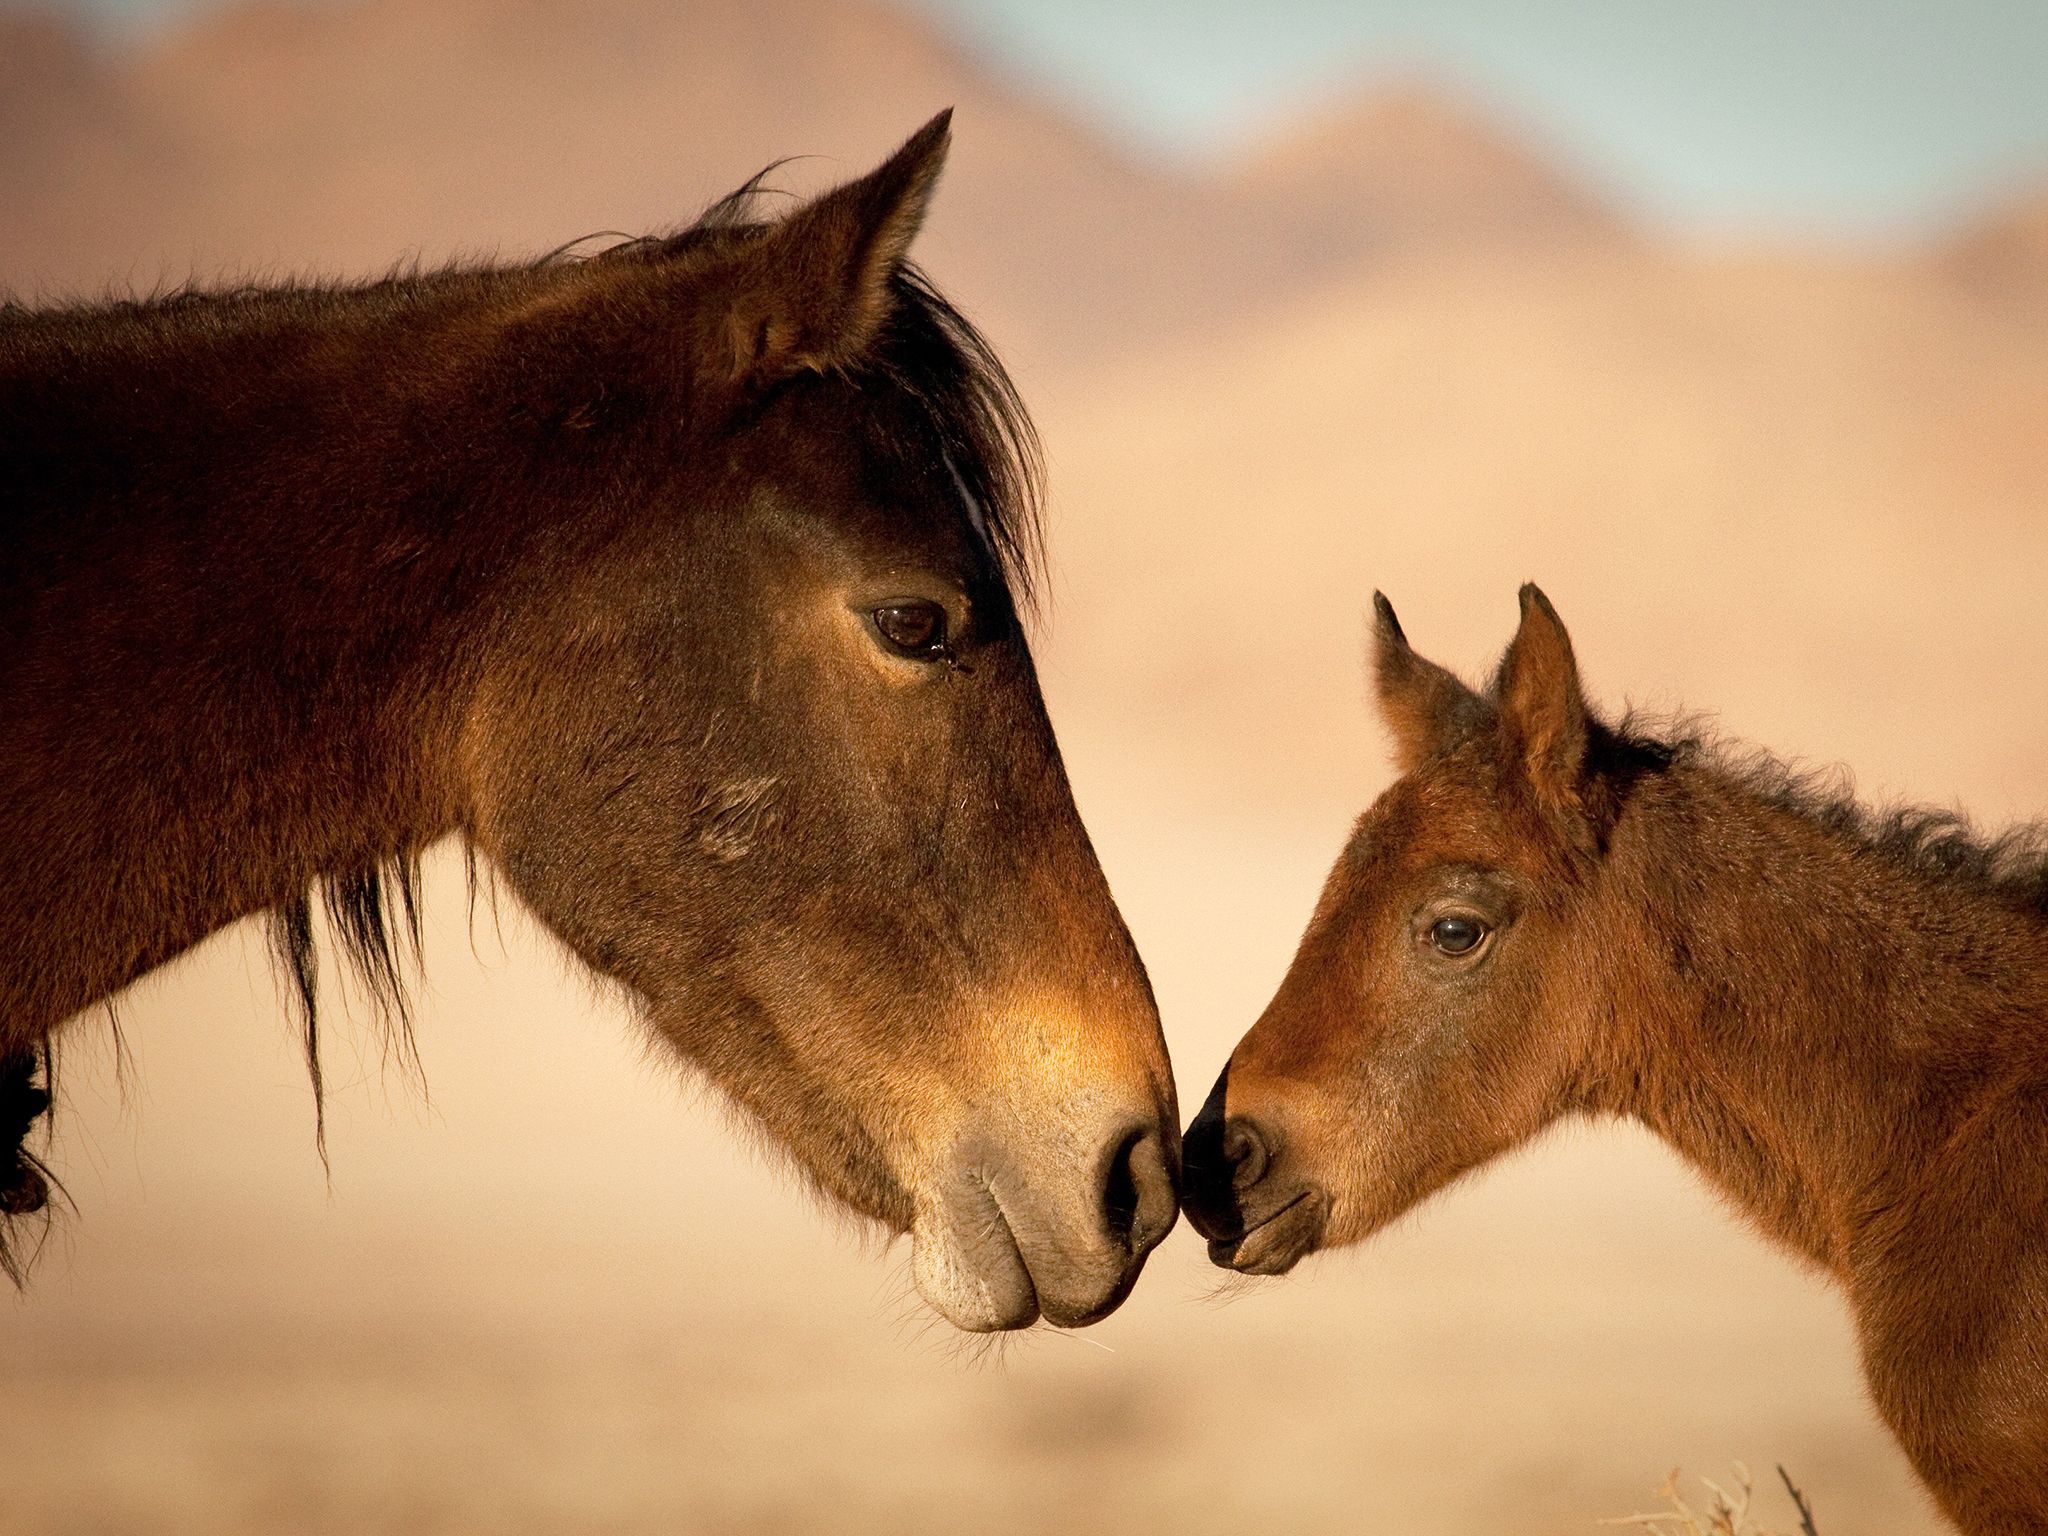 Namibia: Female Horse and a foal kissing. This image is from Africa's Wild West. [Photo of the day - April 2015]